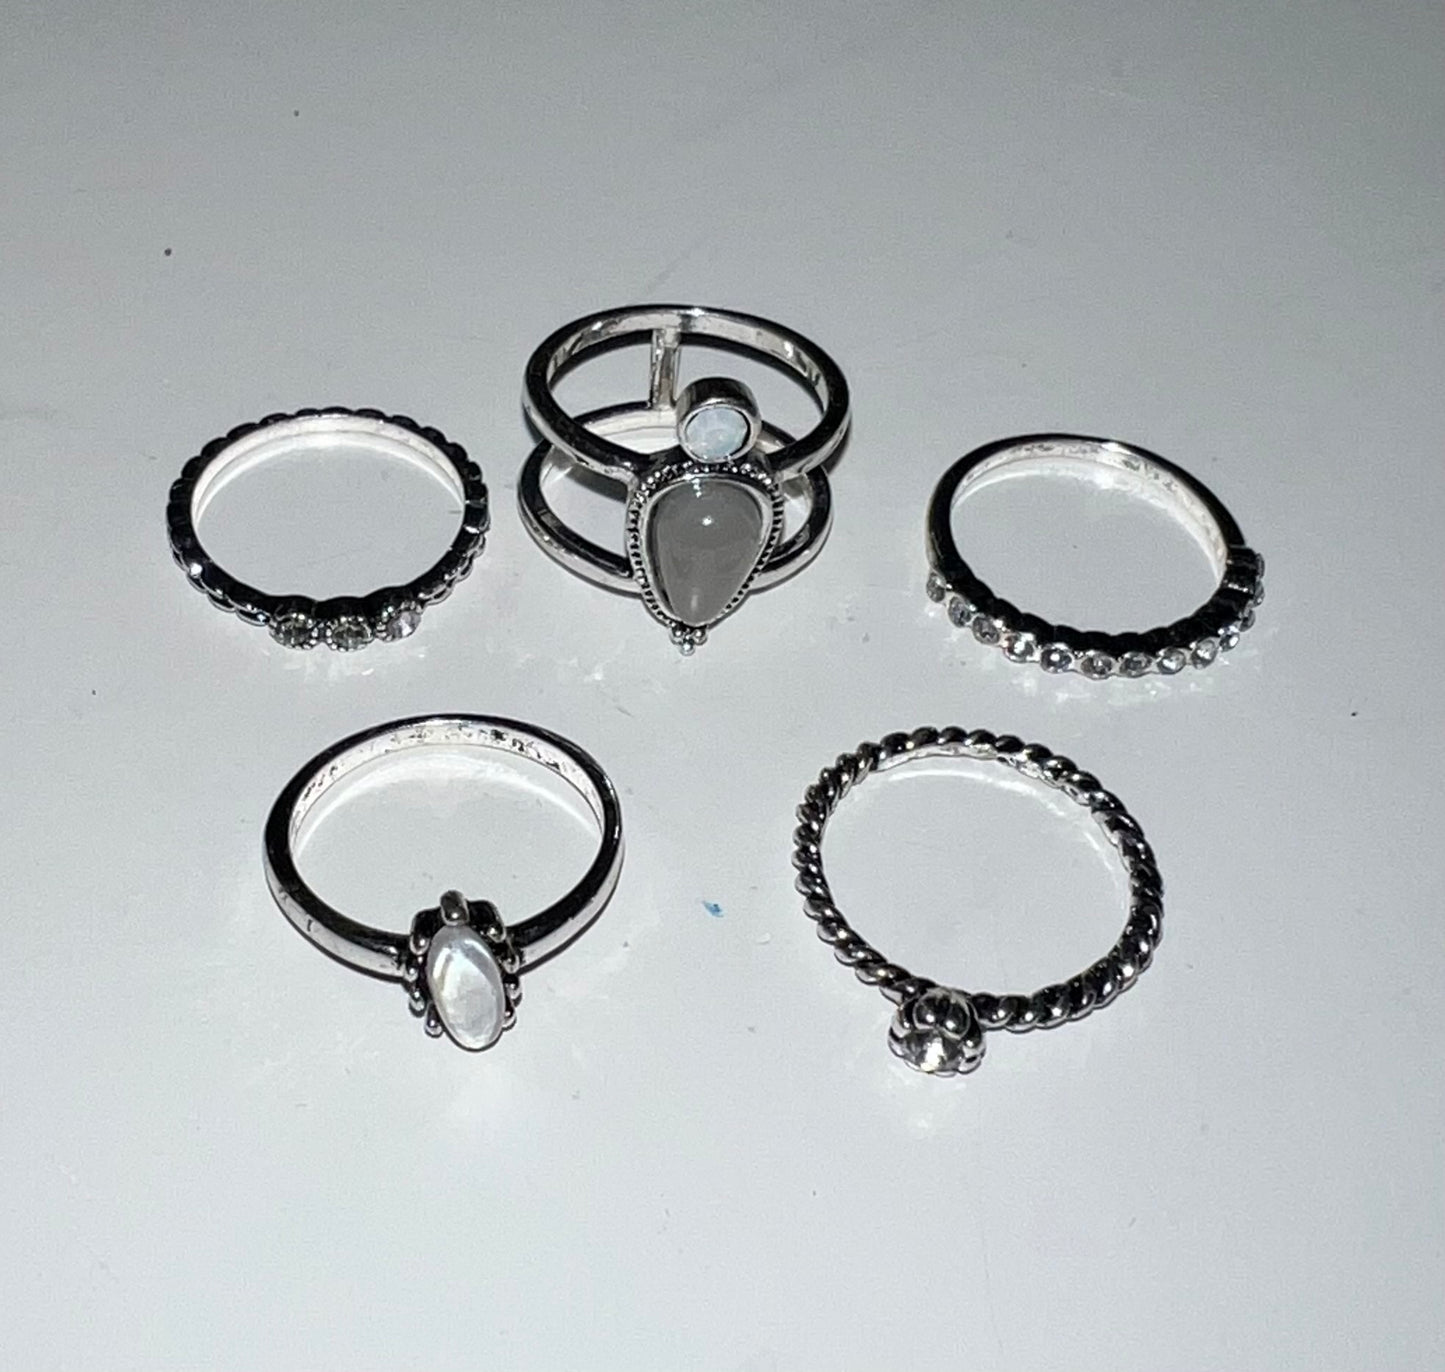 Fashion Jewelry Silver Rings (Size 6, 5pc set) (Limited Stock)